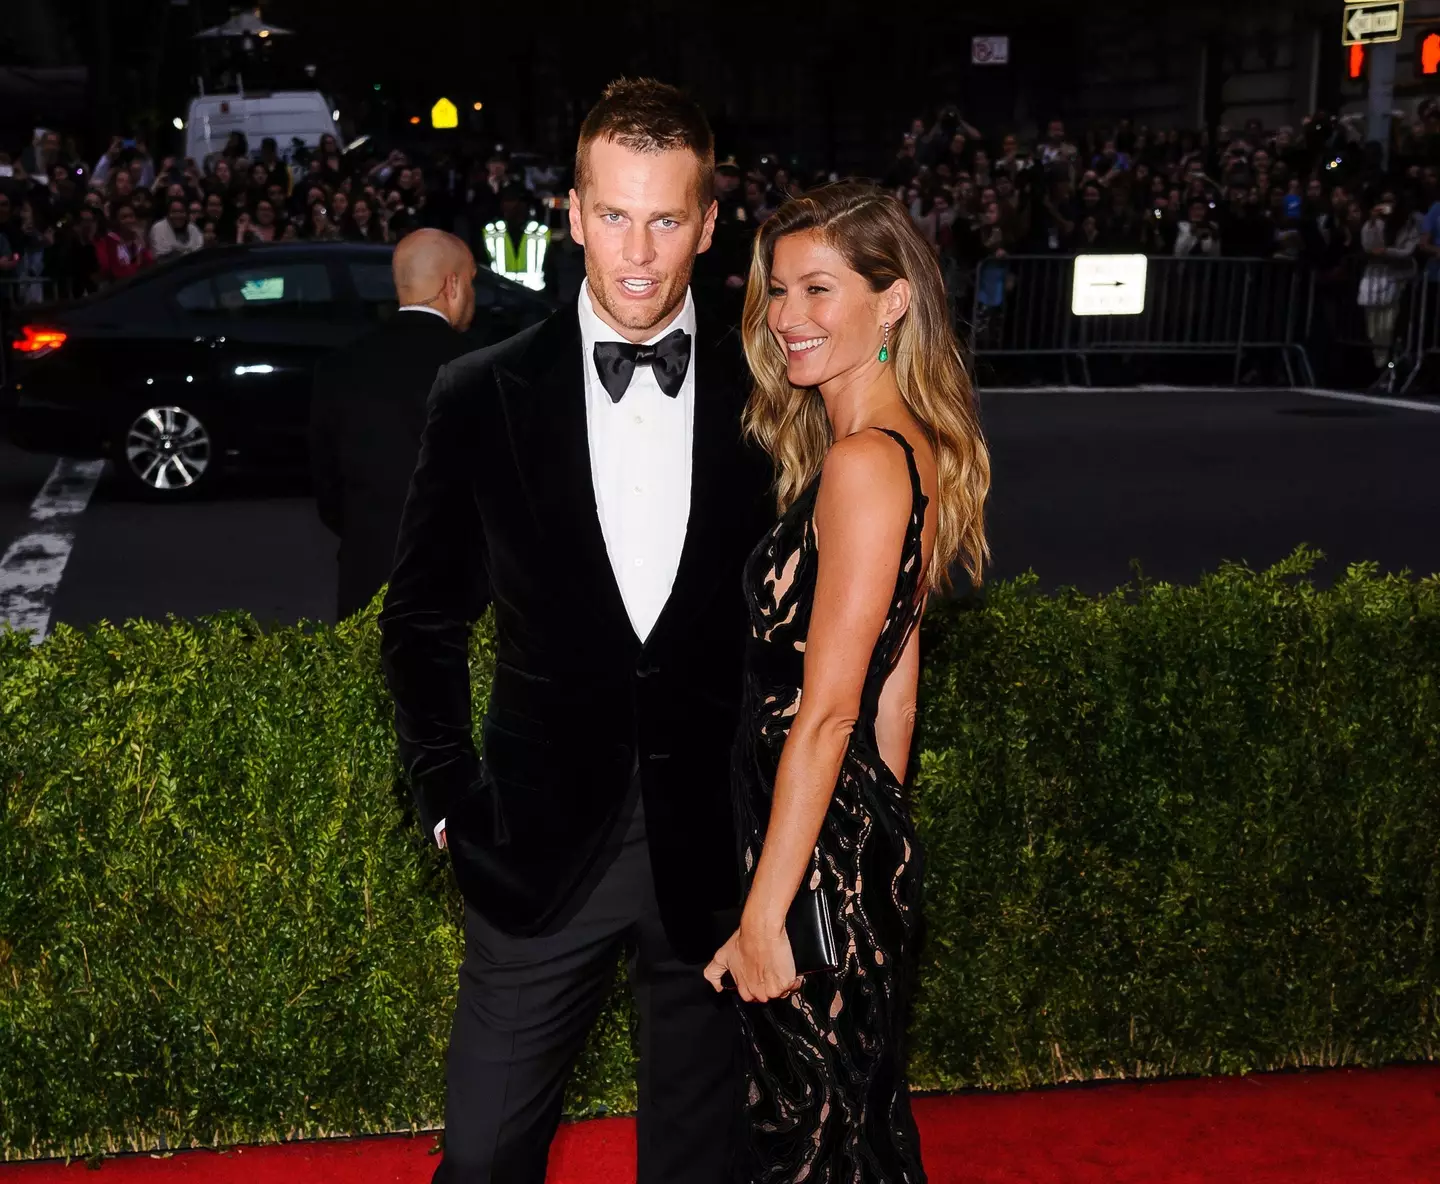 Tom Brady and Gisele Bundchen have divorced after 13 years of marriage.